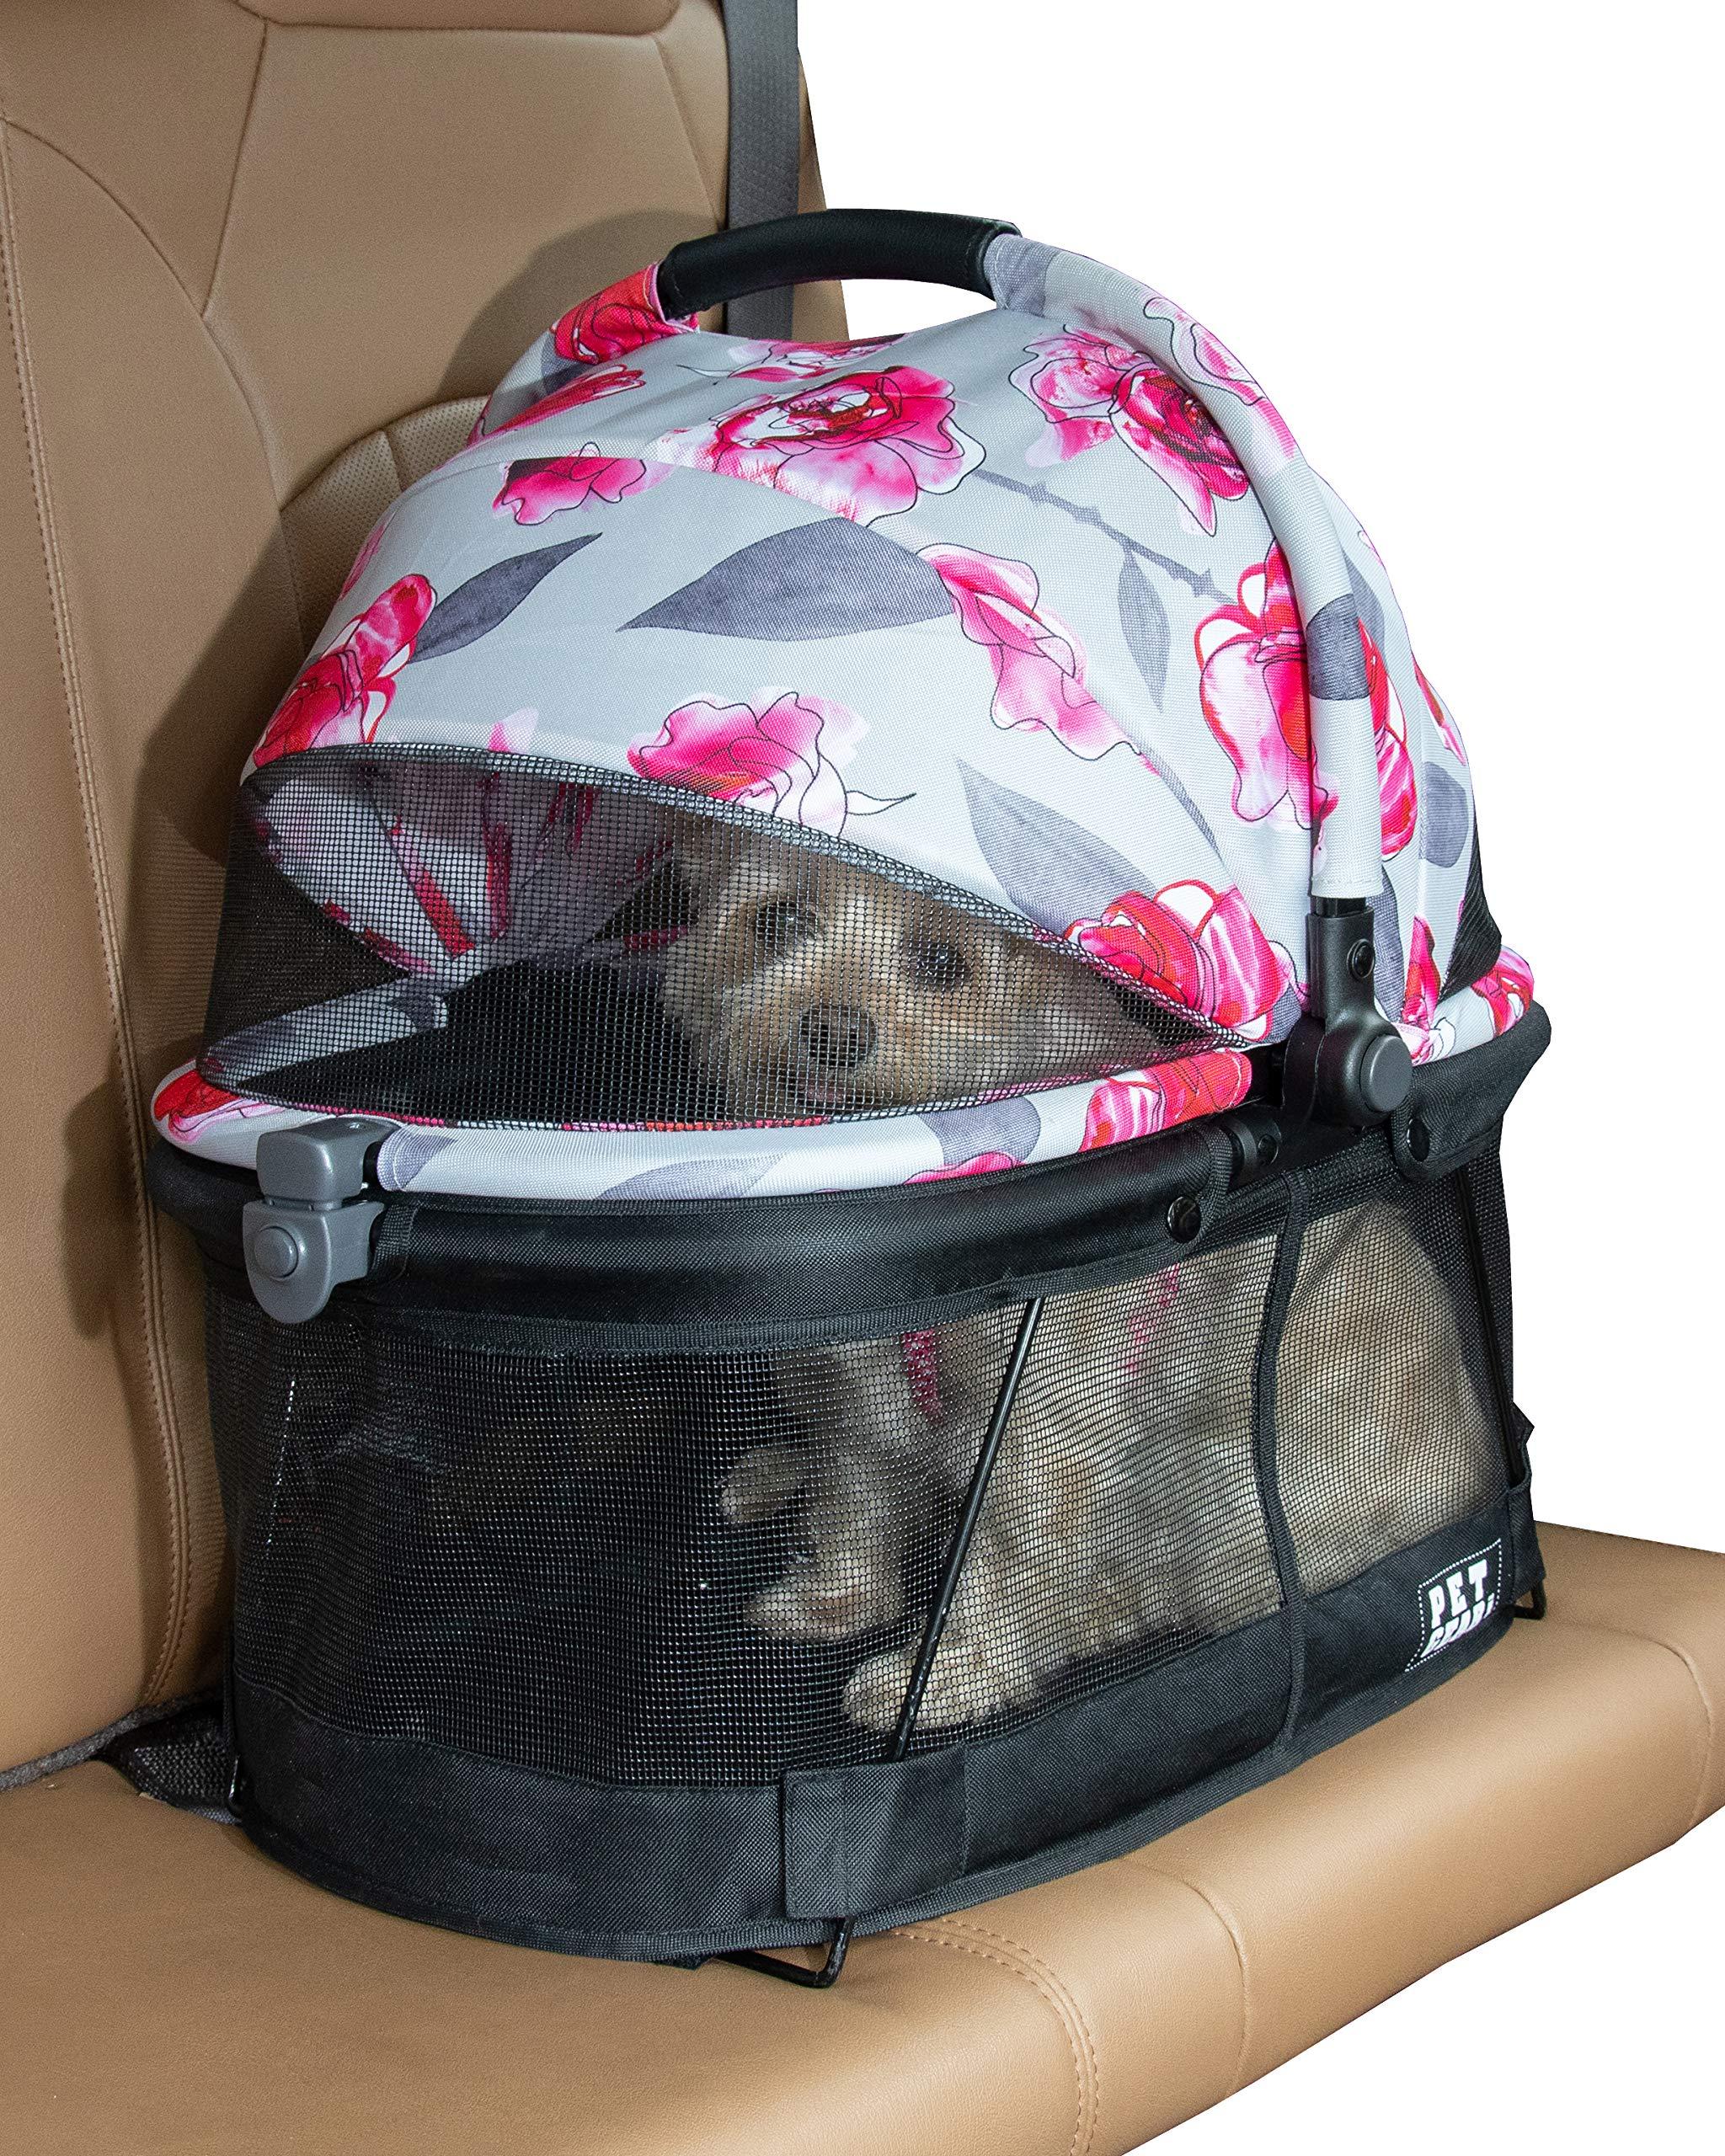 Pet Gear PG1040NZFL View 360 Pet Carrier & Car Seat for Small Dogs & Cats with Mesh Ventilation for Easy Viewing, Floral